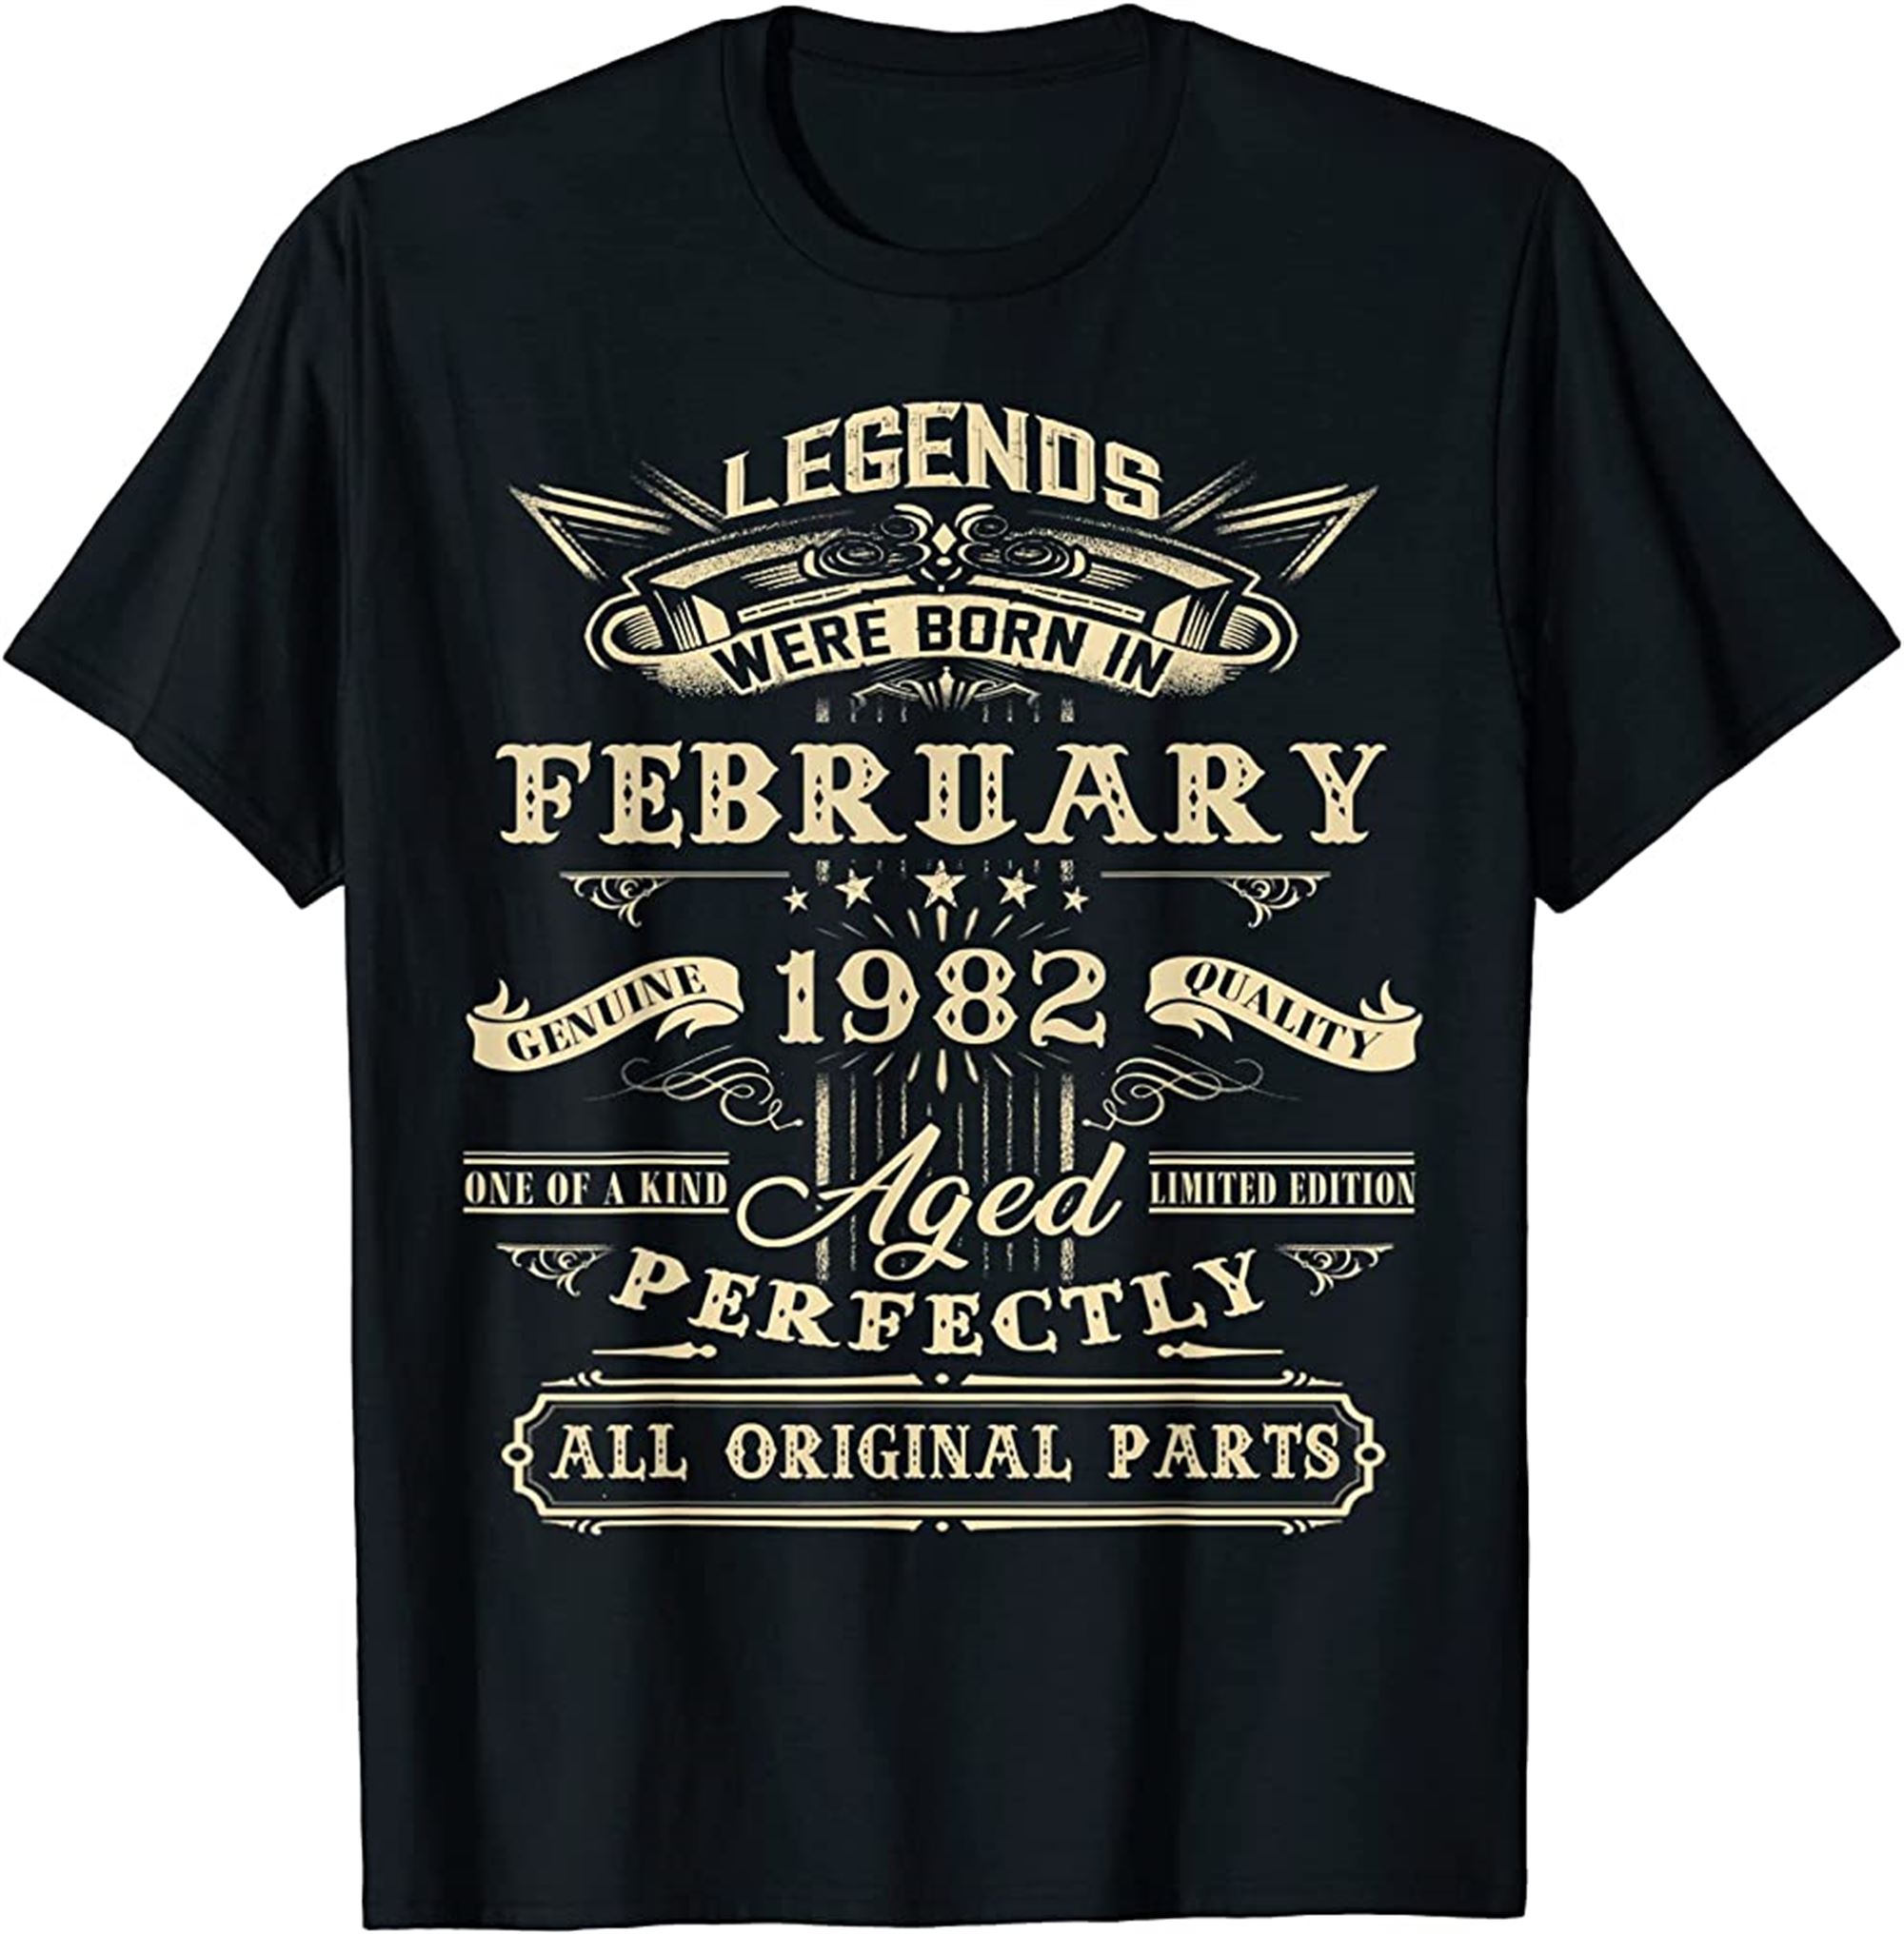 40th Birthday Gift For Legends Born February 1982 40 Yrs Old T-shirt Size Up To 5xl